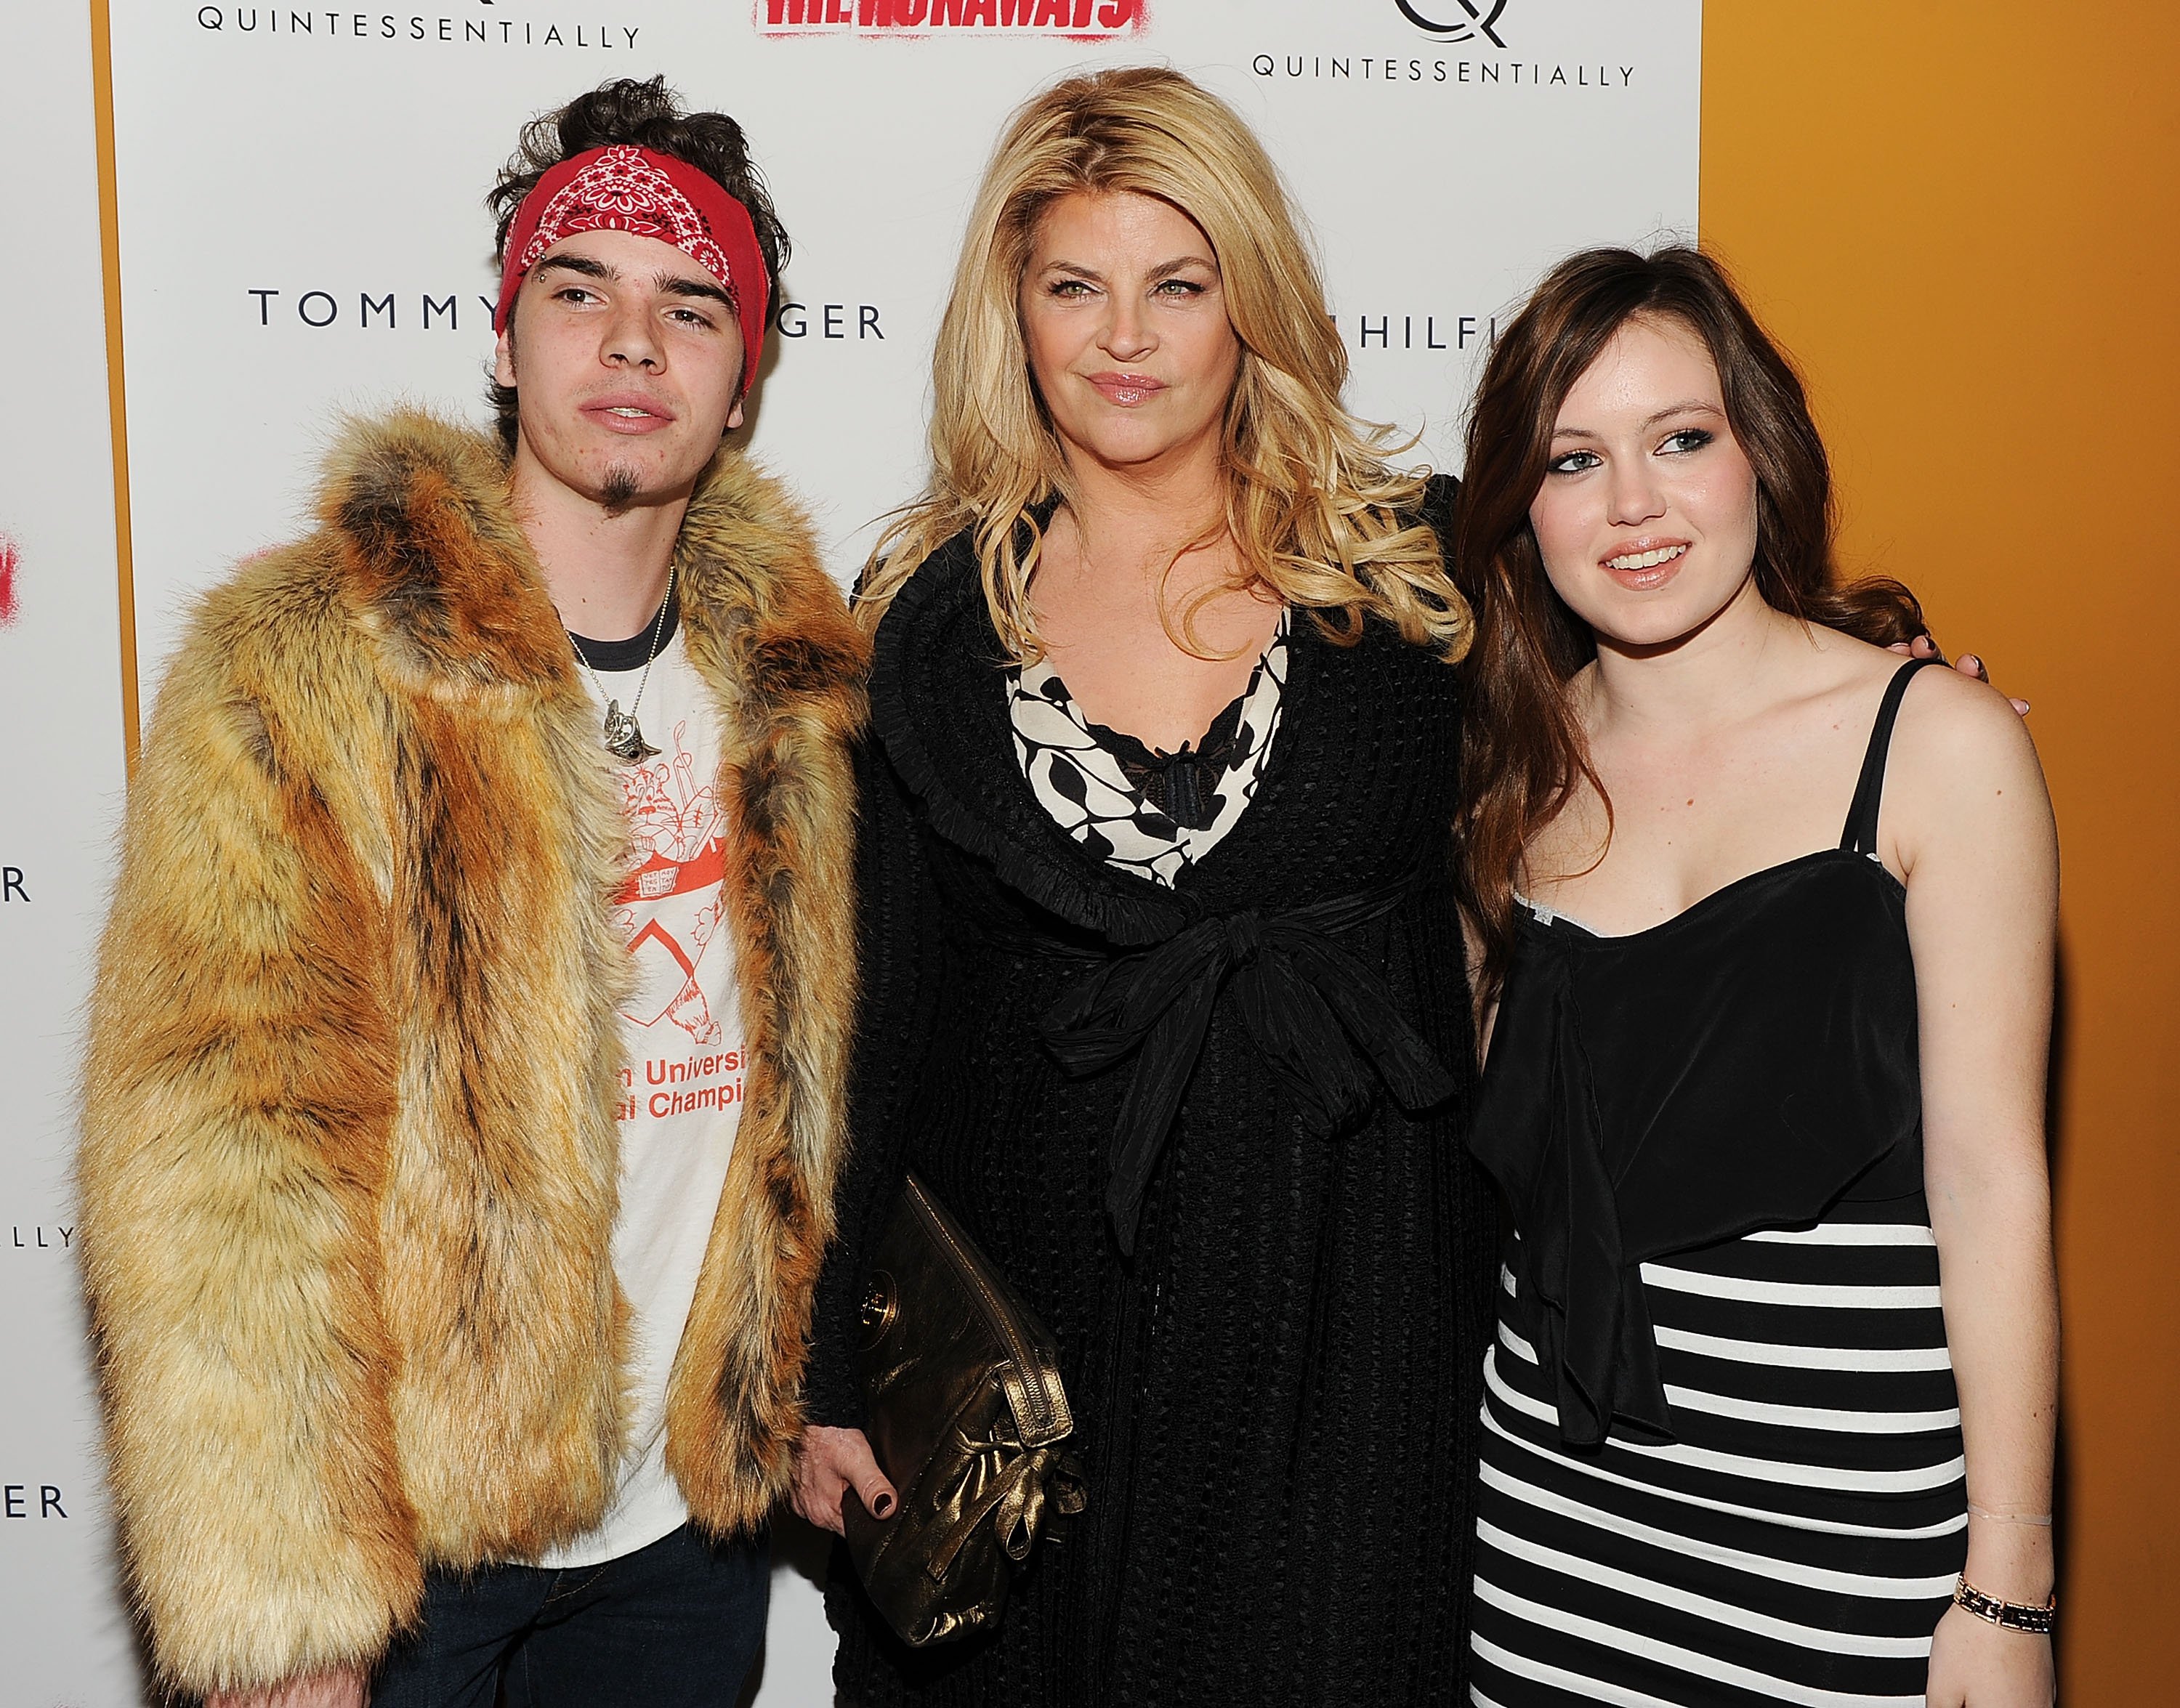 Actress Kirstie Alley (C) with children William True (L) and Lillie Price (R) at the "The Runaways" New York premiere at Landmark Sunshine Cinema on March 17, 2010 in New York City. | Source: Getty Images